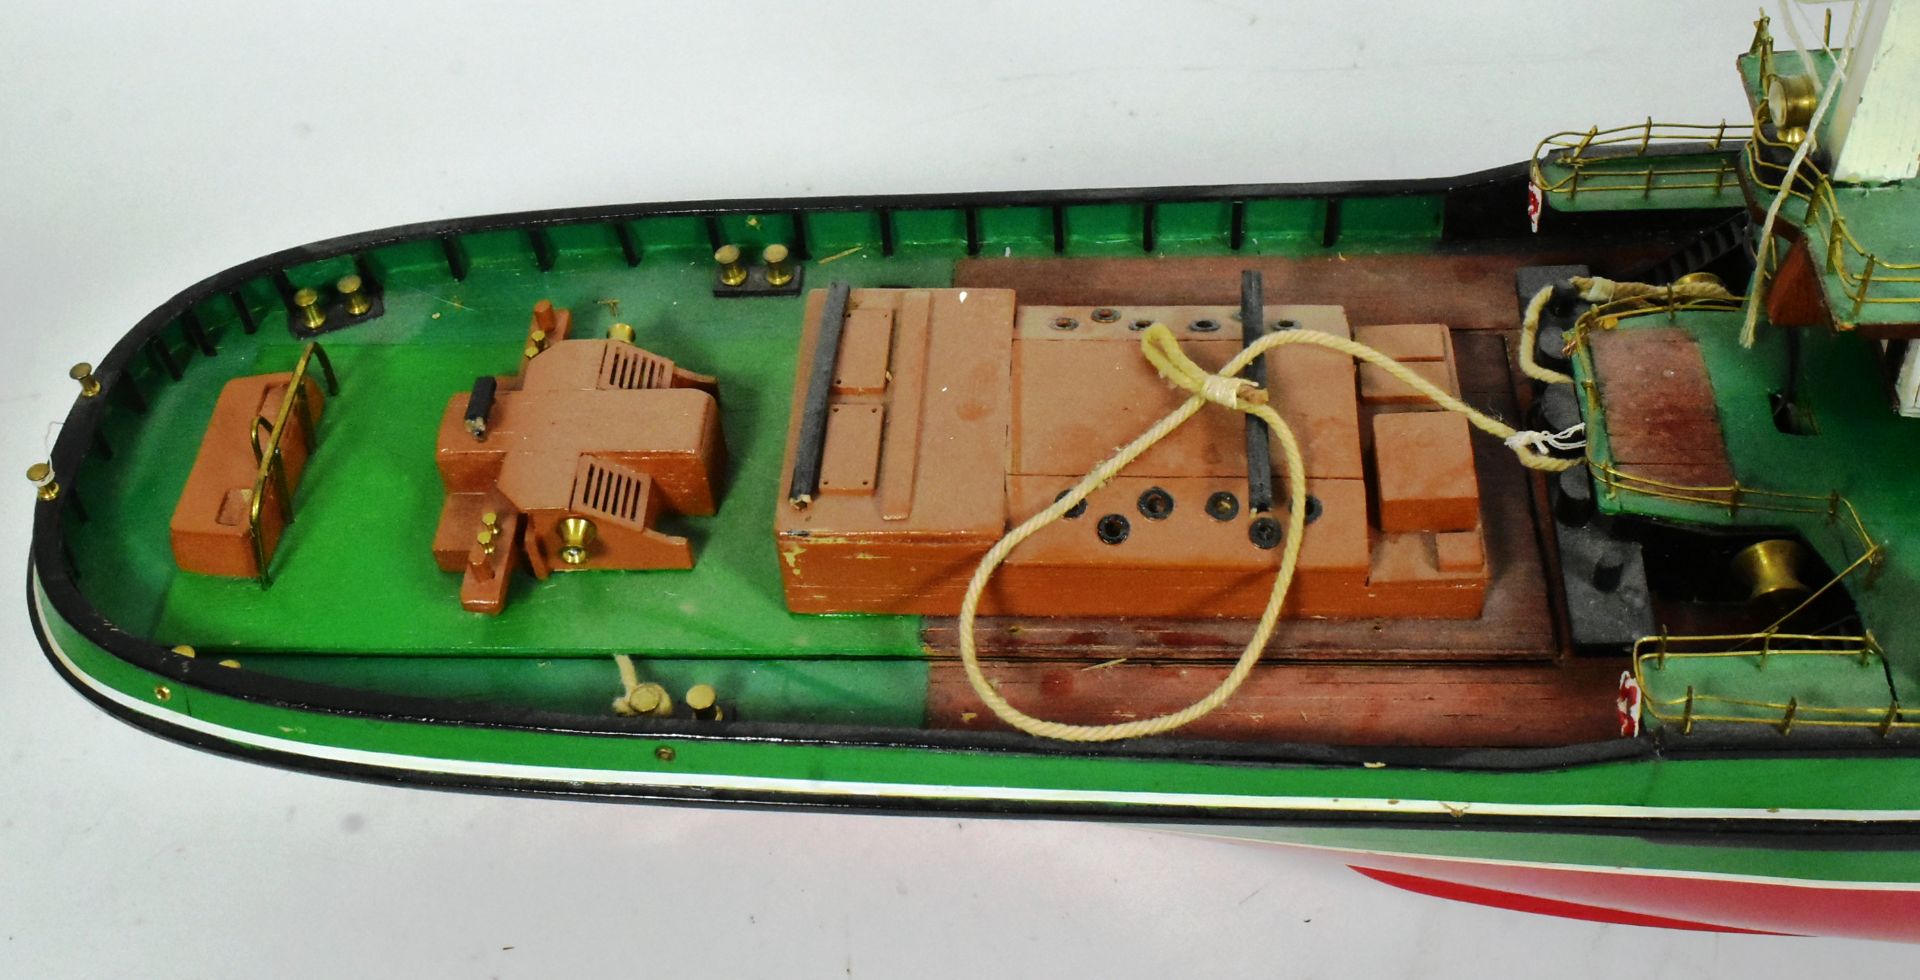 RADIO CONTROLLED BOAT - VINTAGE HAND BUILD MODEL - Image 4 of 7